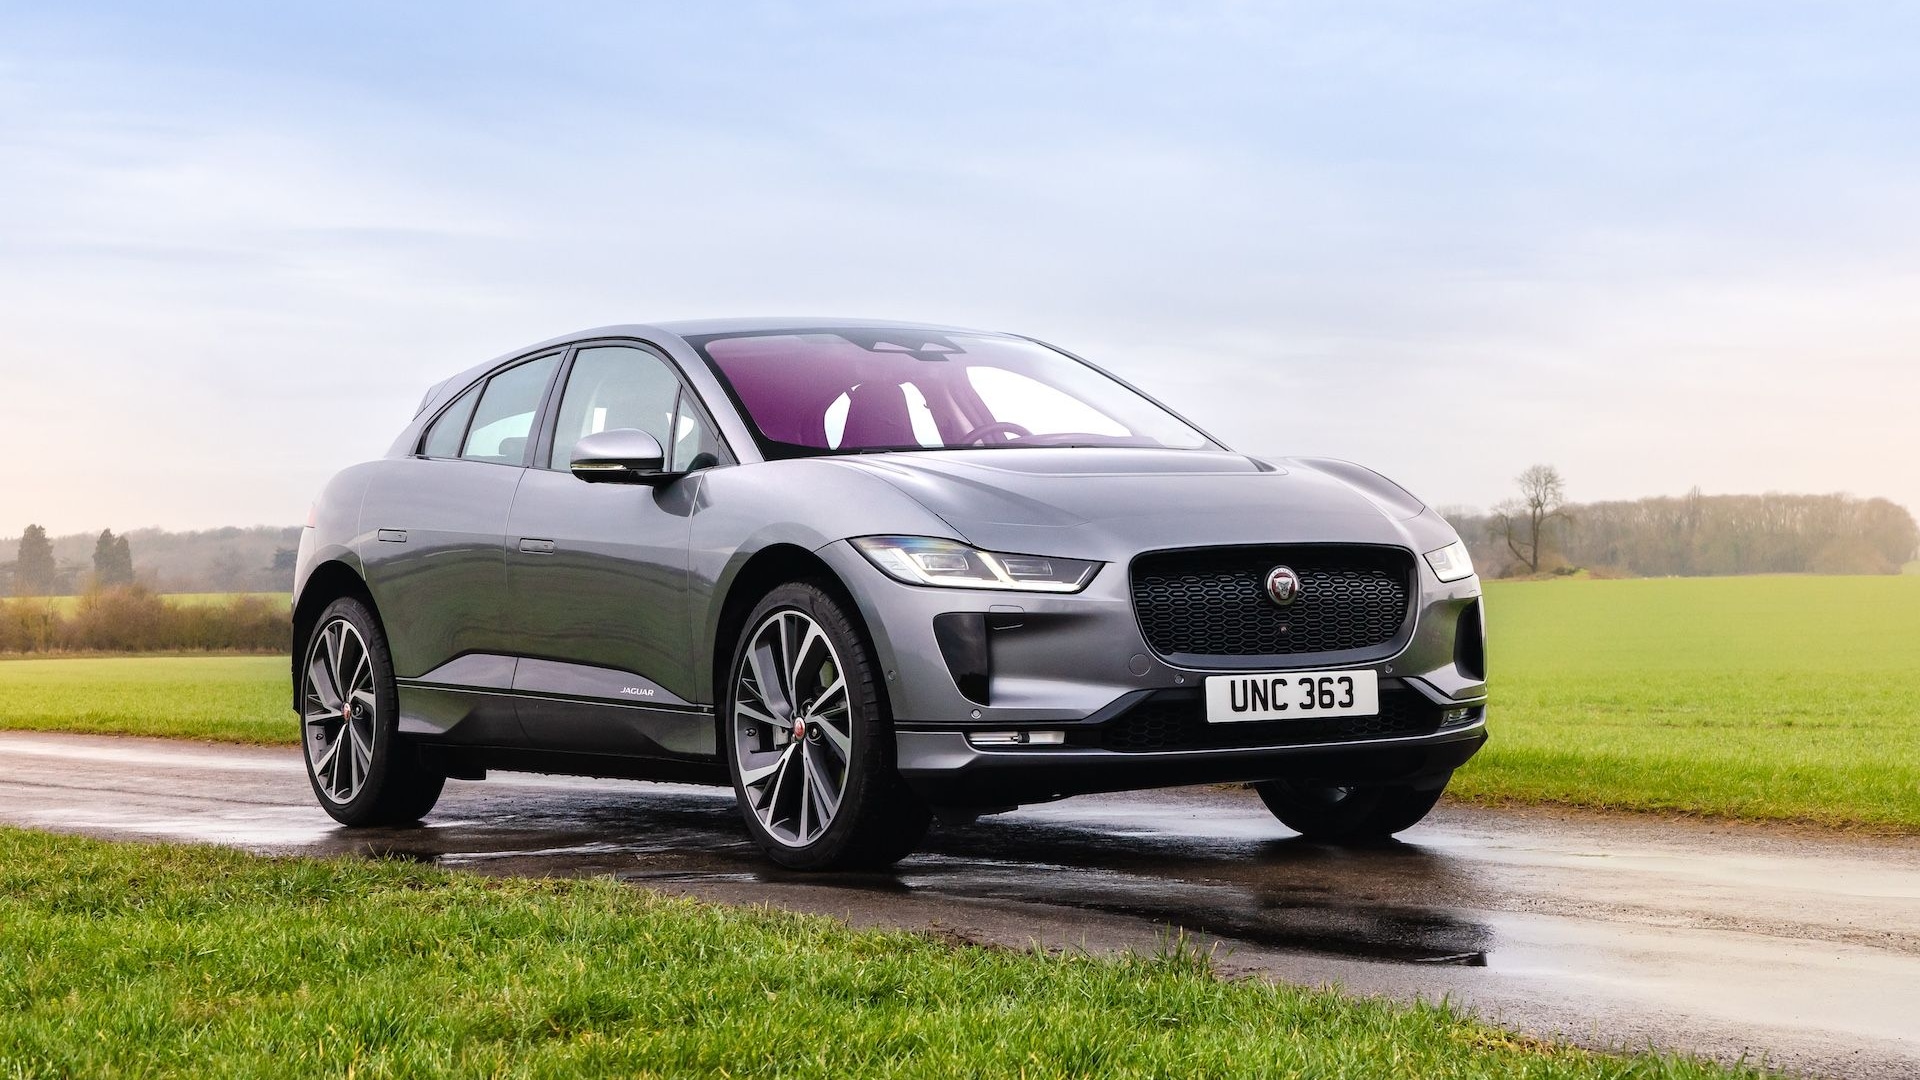 2019 Jaguar I-Pace electric crossover (brief) first drive review: 4:34 to  the future